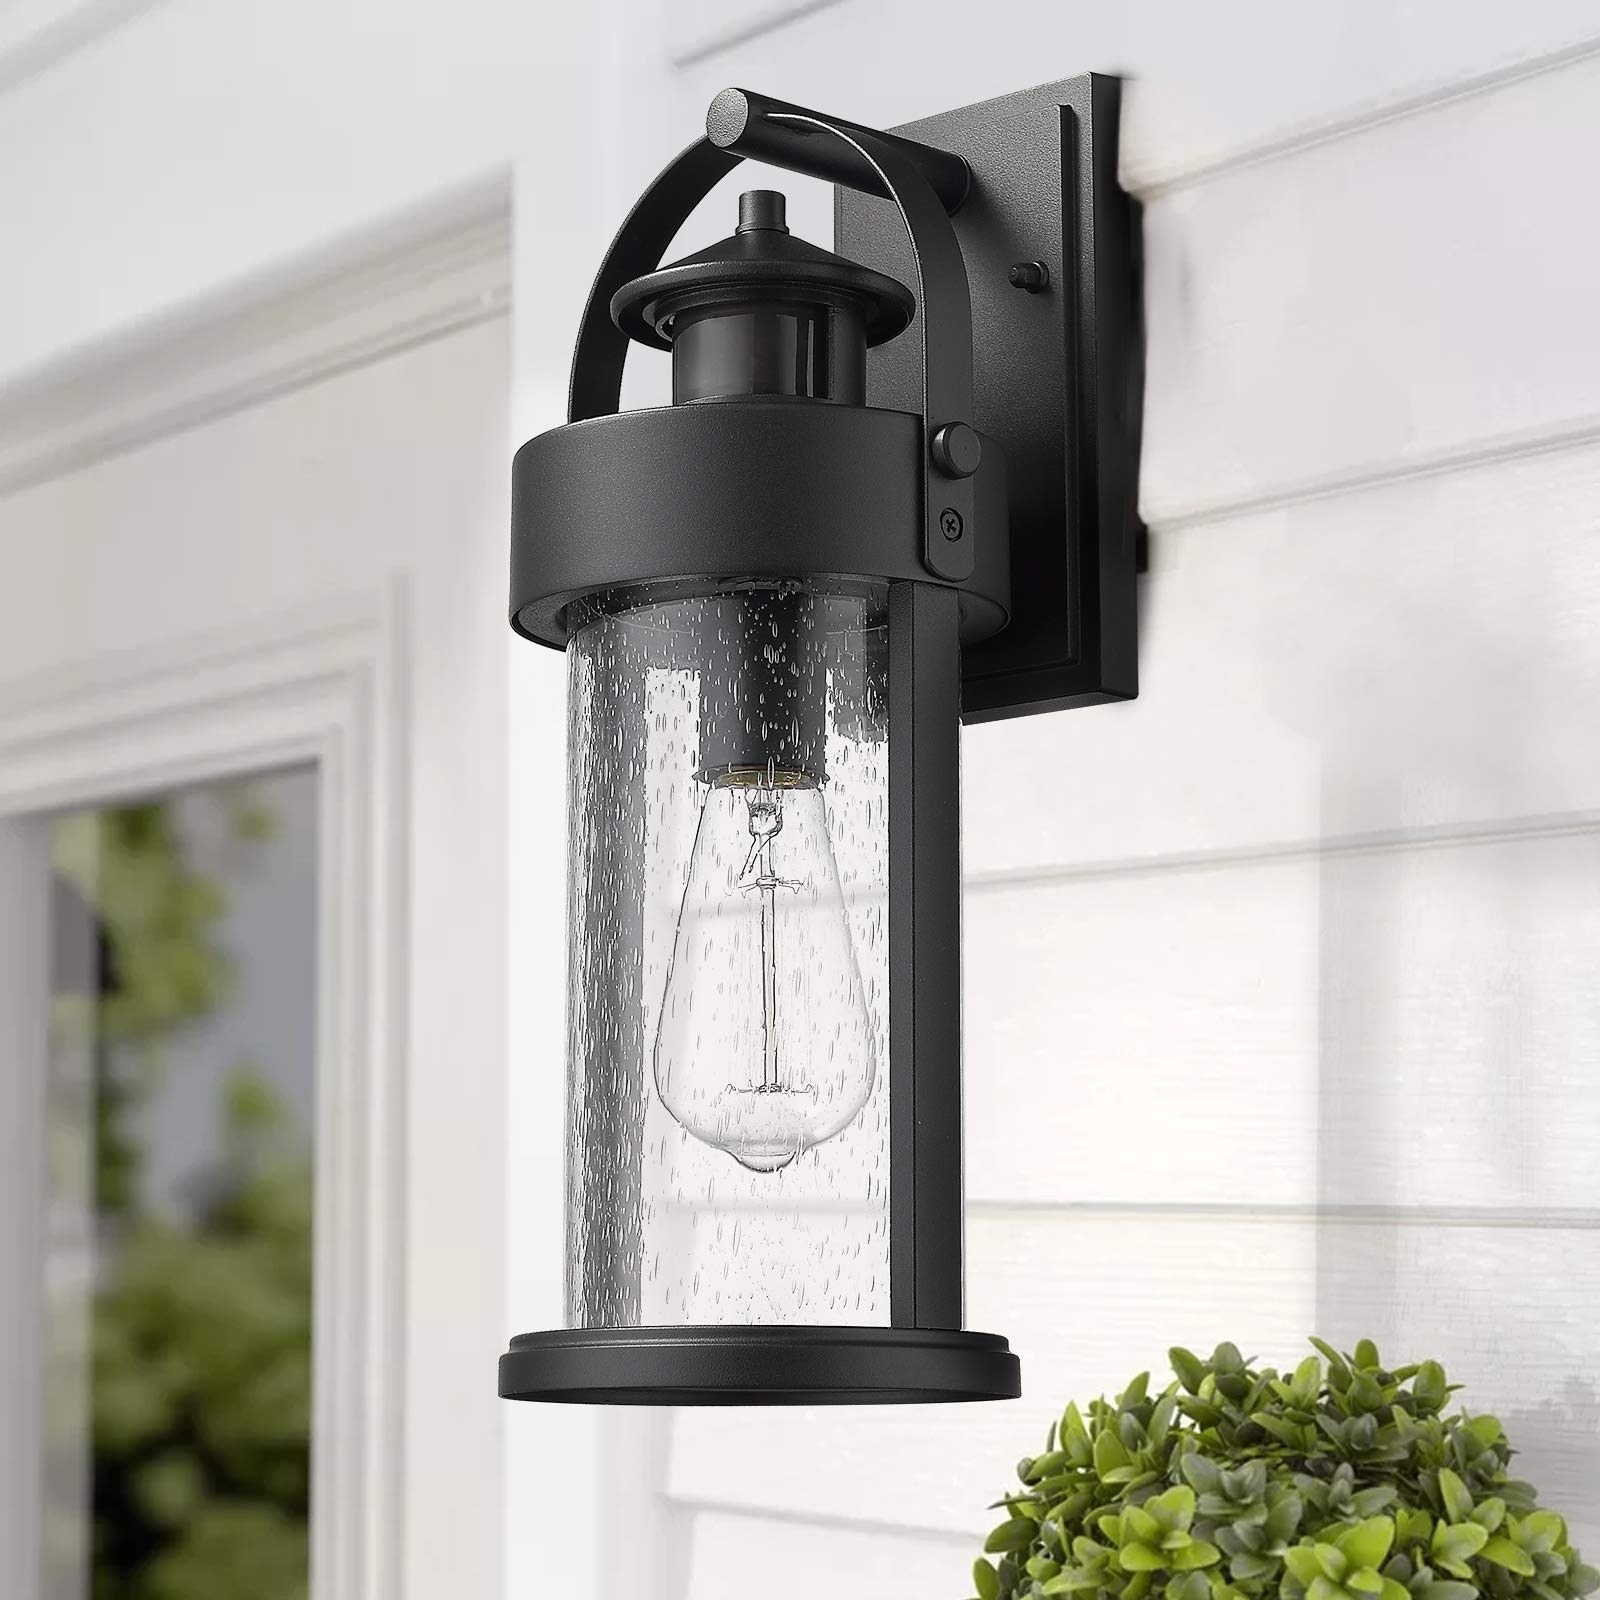 Motion Sensor Outdoor Wall Light with Seeded Glass On Sale Bed Bath   Beyond 37540323